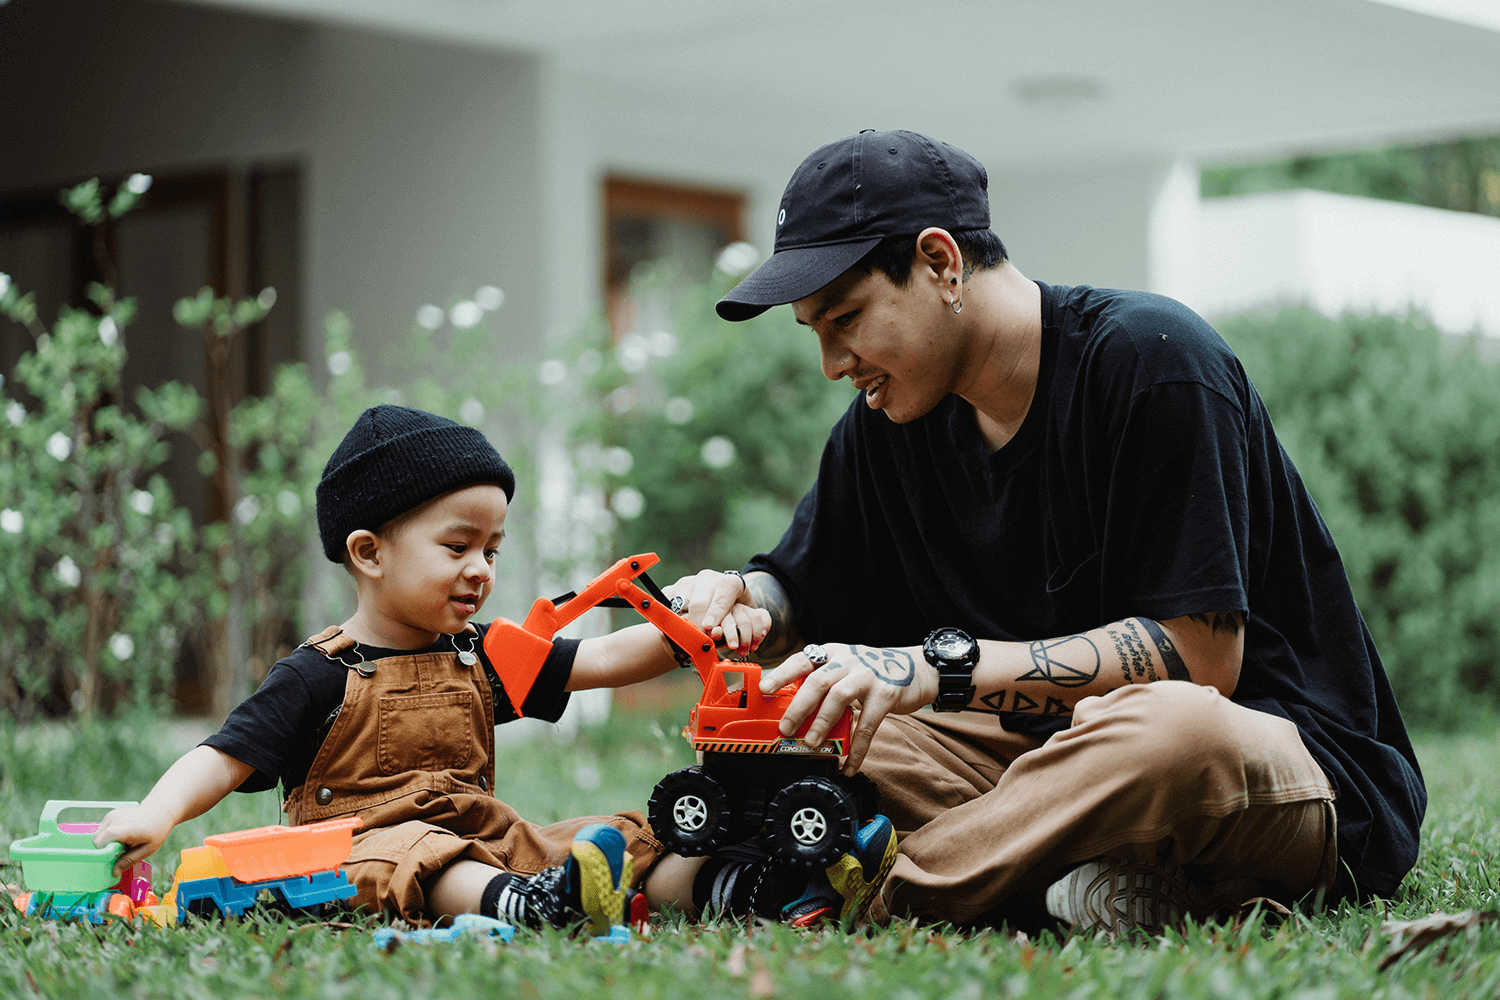 A dad and child playing with toy trucks and excavators outside.